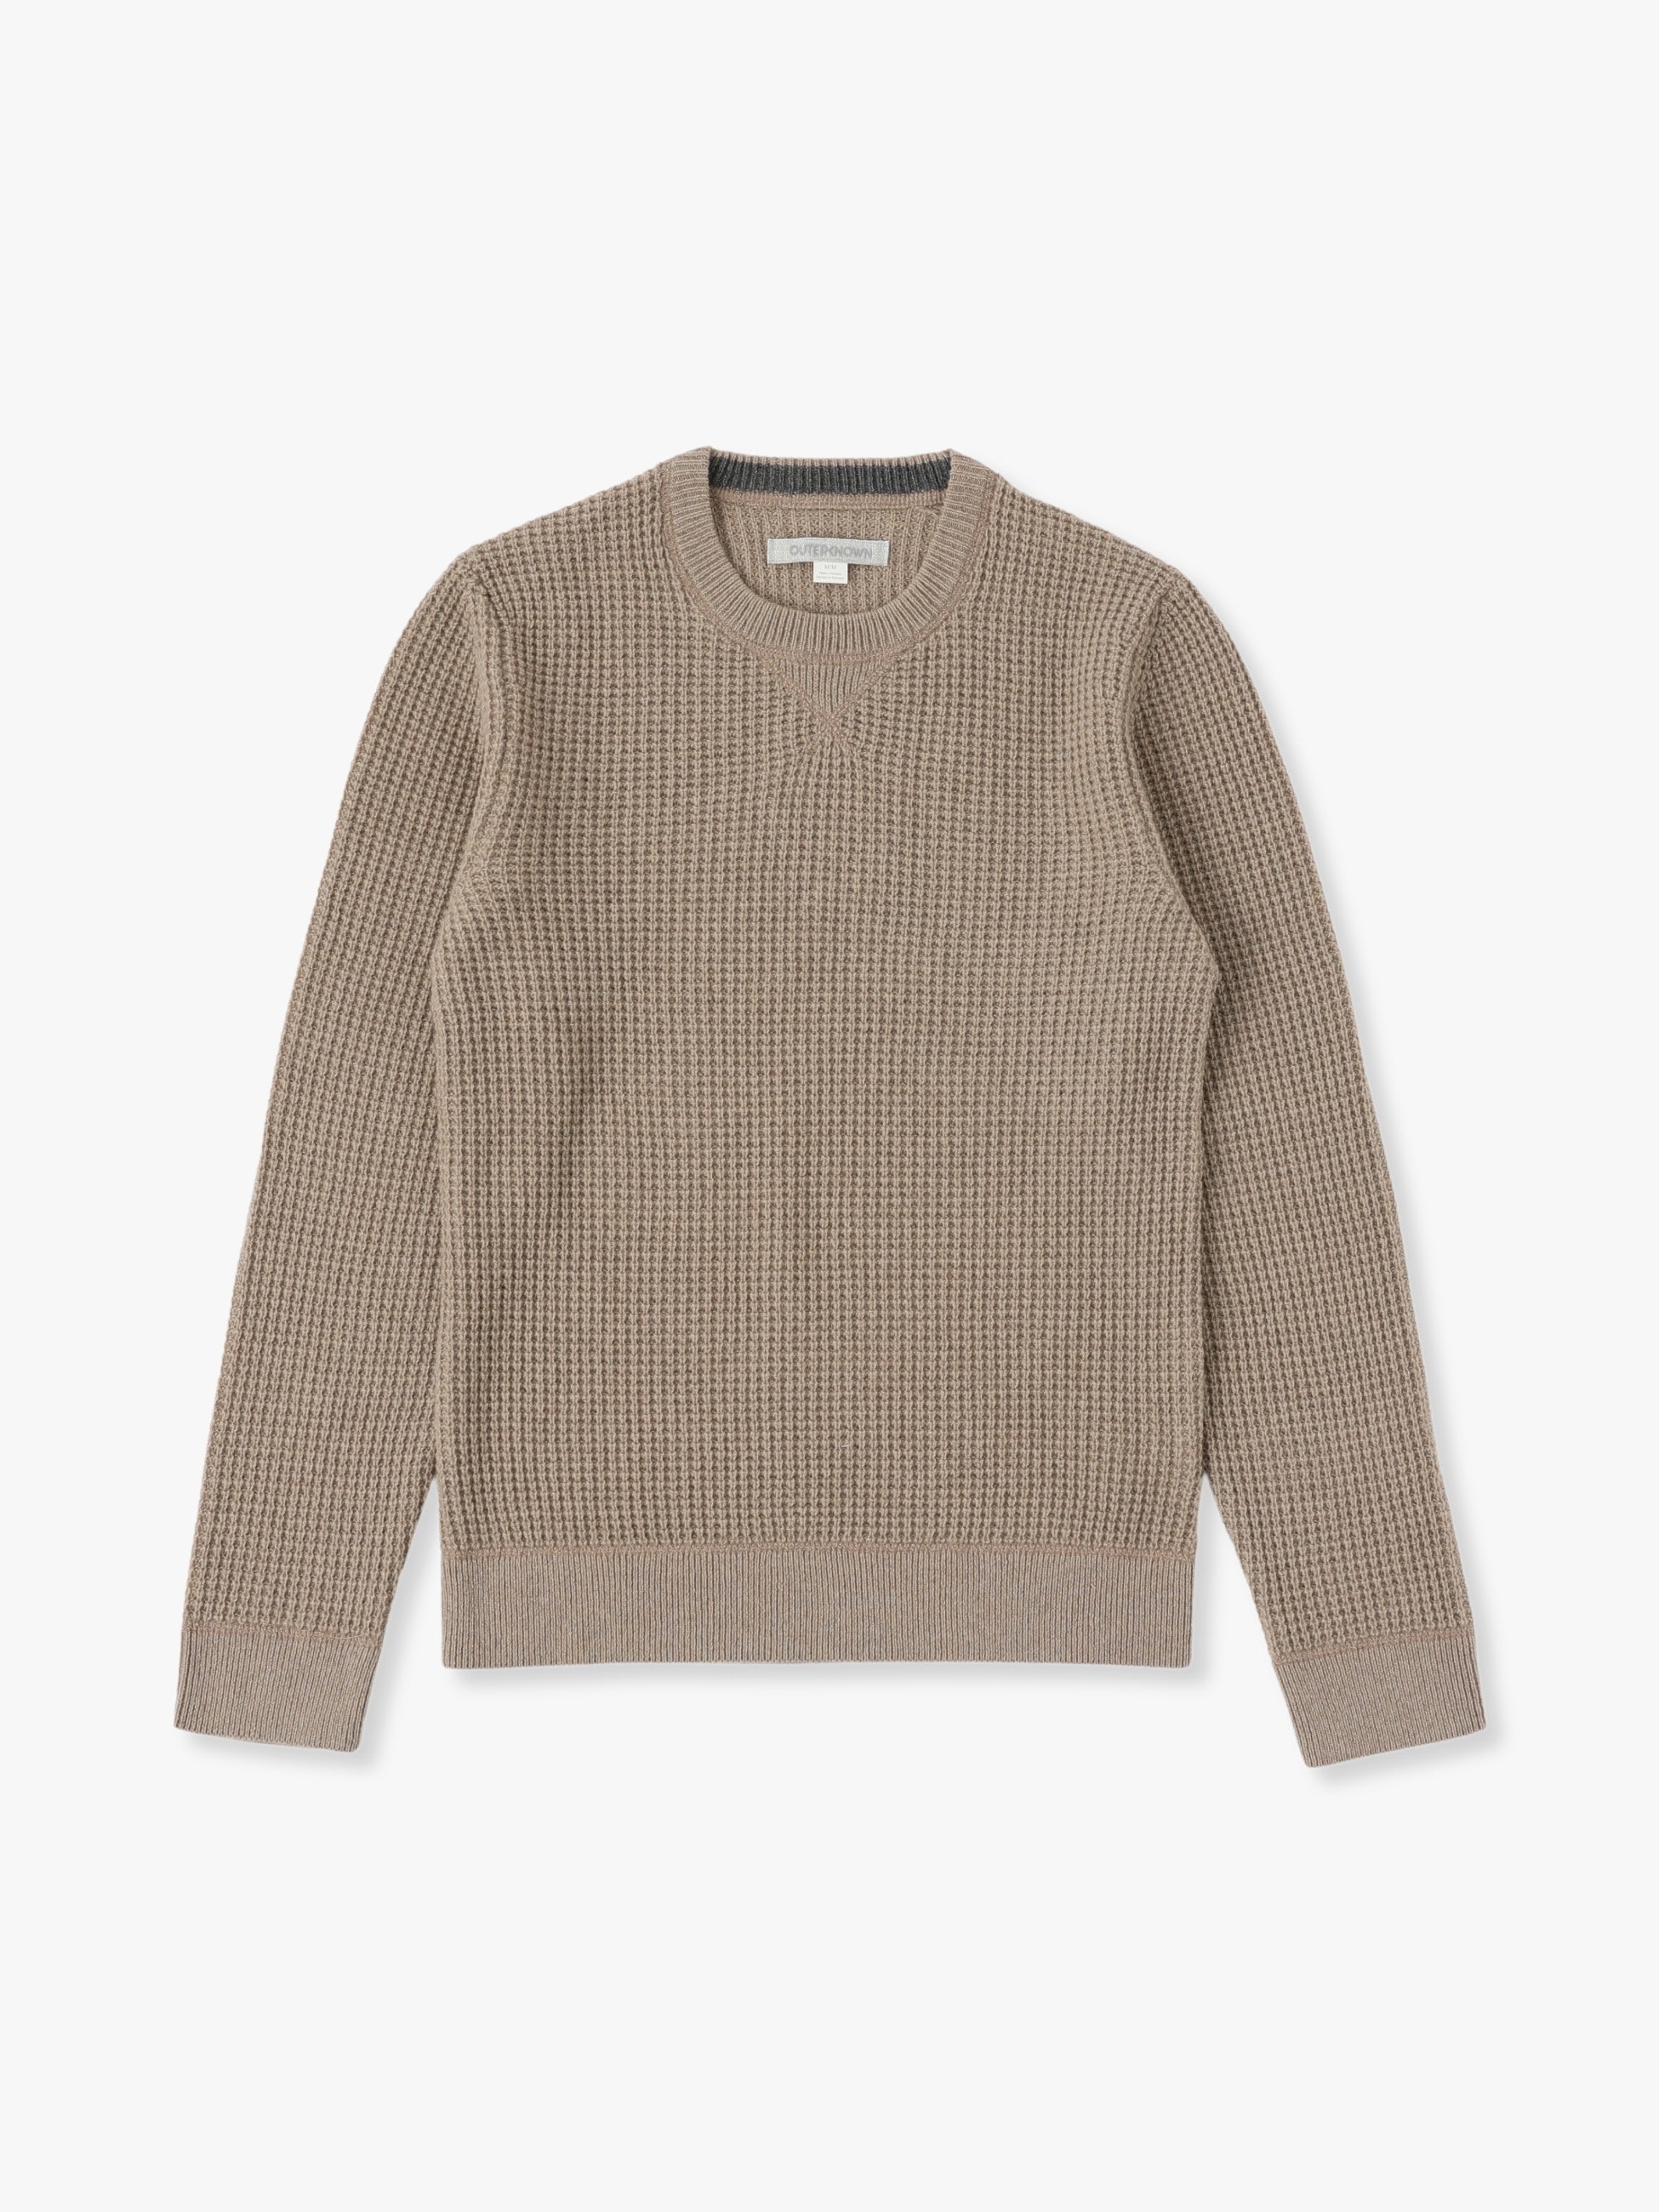 Reimagine Cashmere Waffle Sweater｜OUTERKNOWN(アウターノウン)｜Ron 